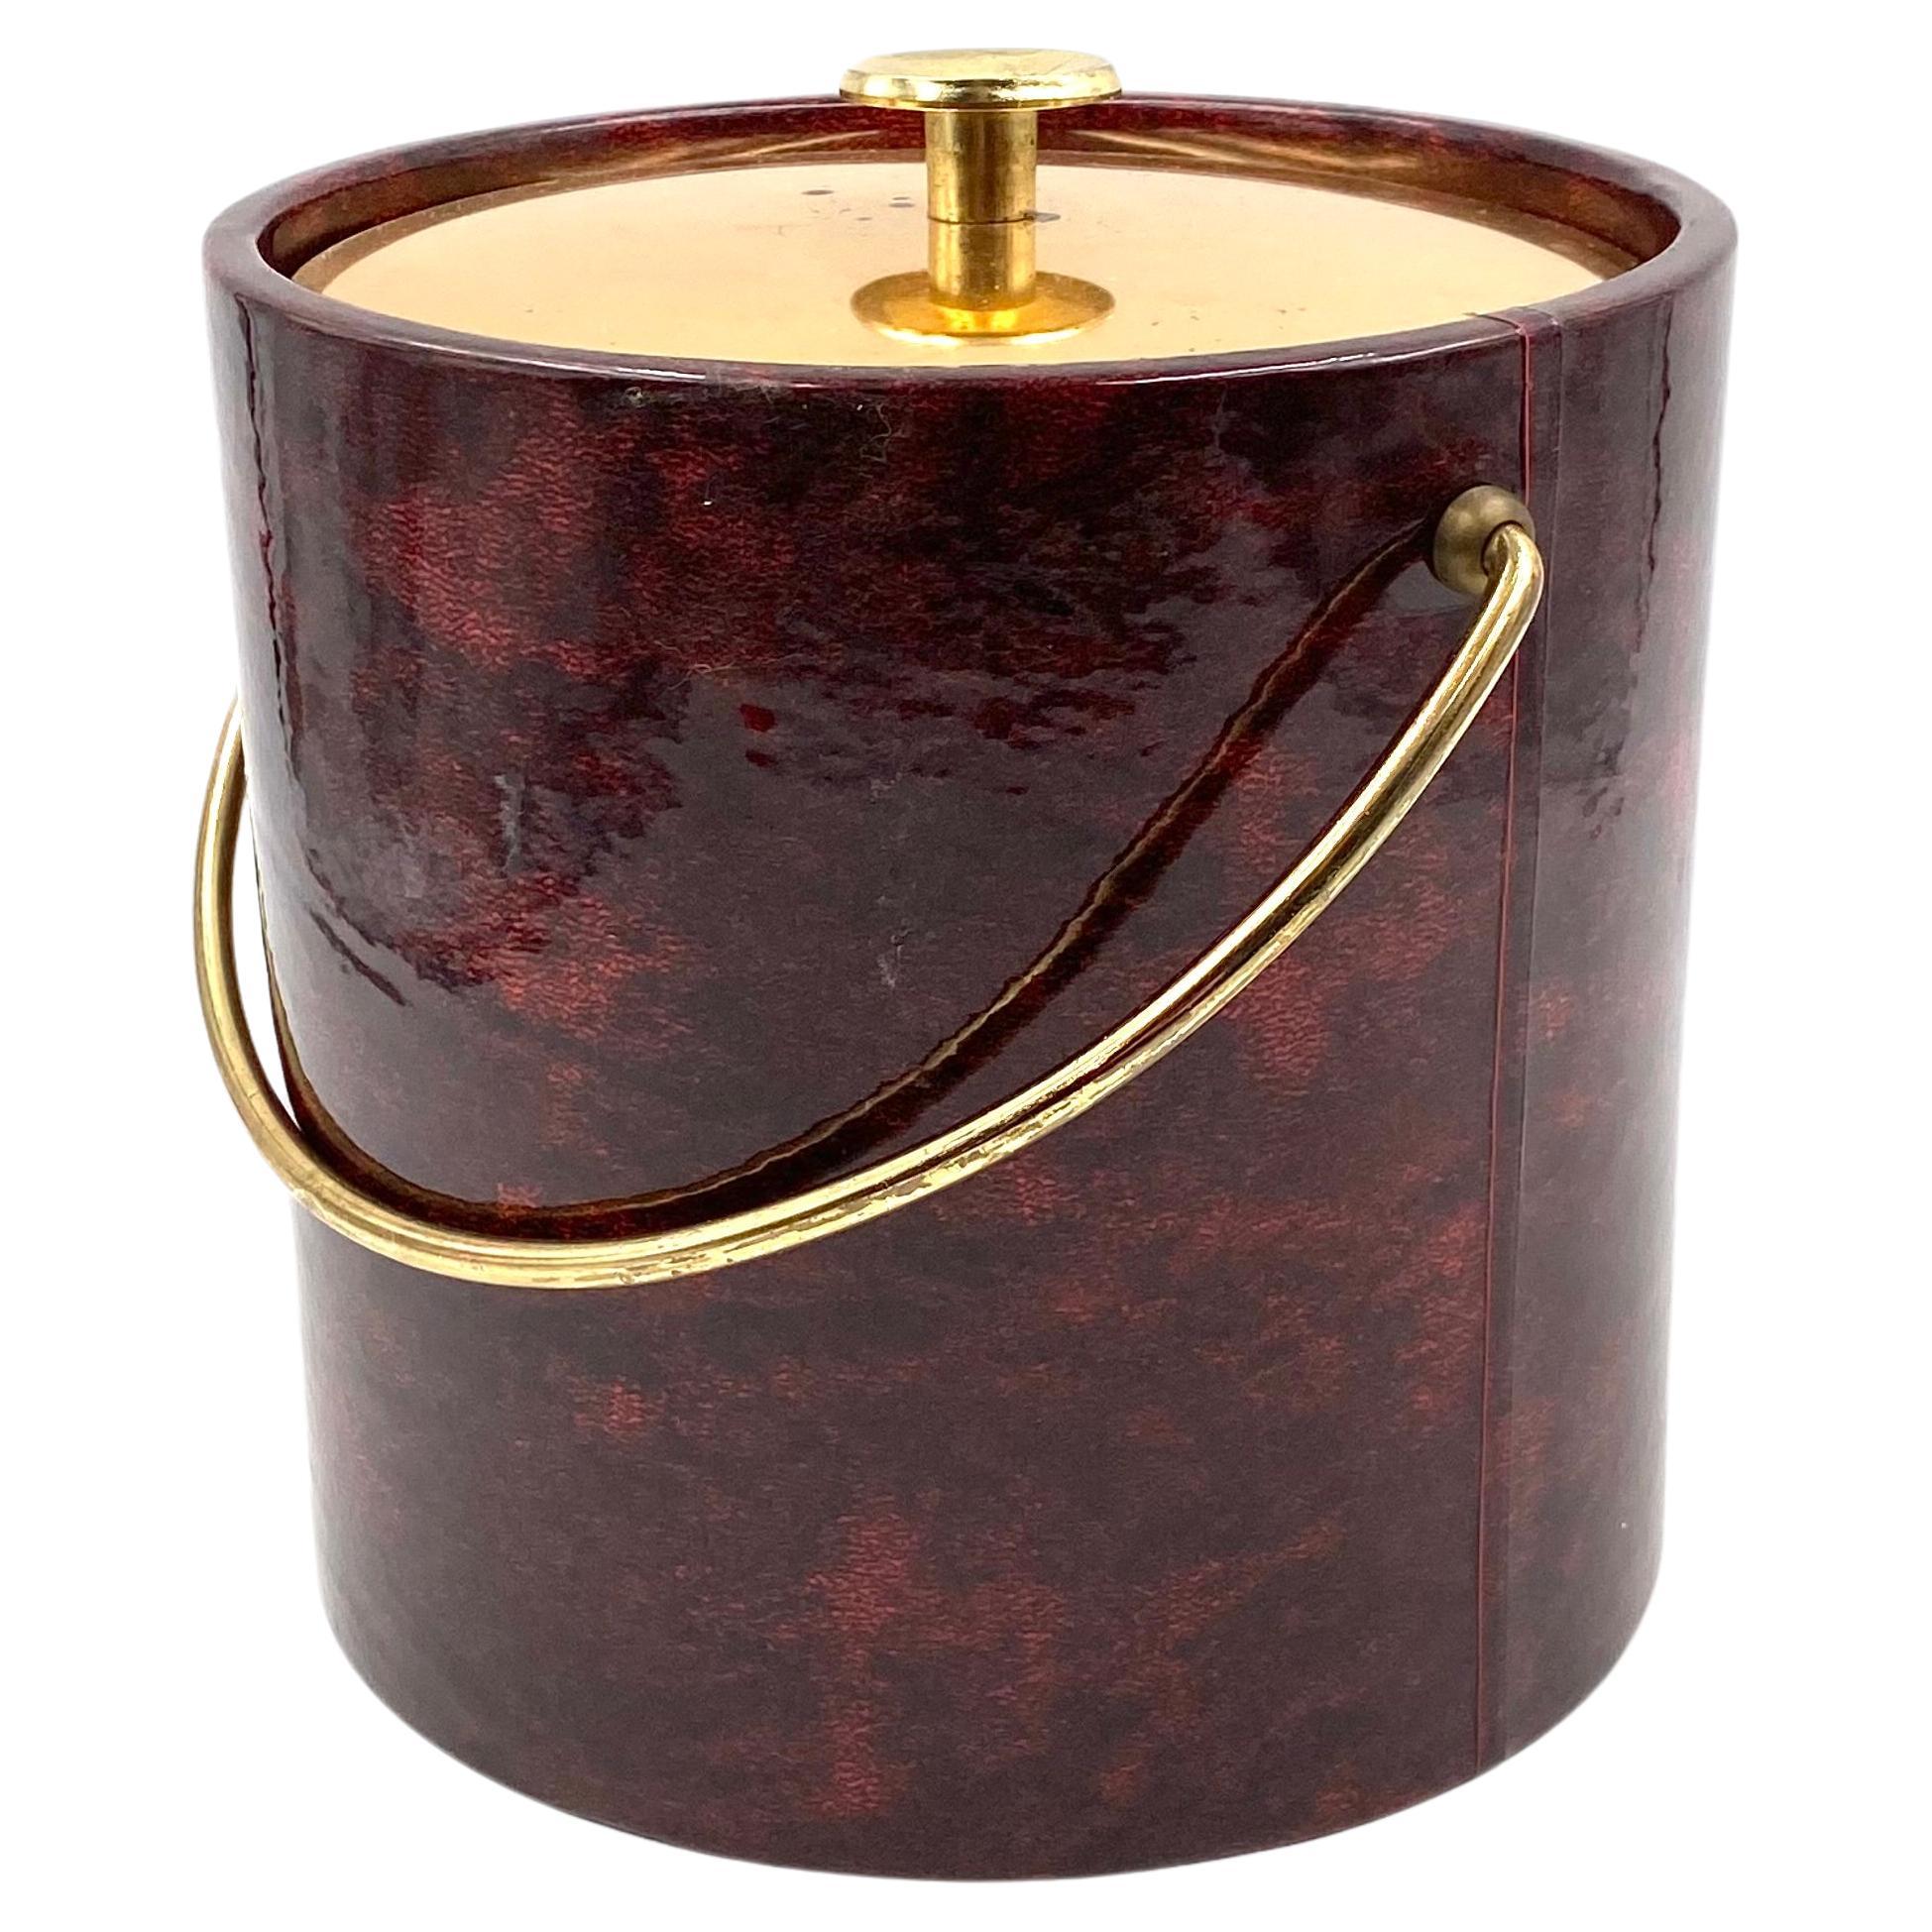 Aldo Tura, Brass and red Parchment cooler / Ice bucket, Italy 1960s For Sale